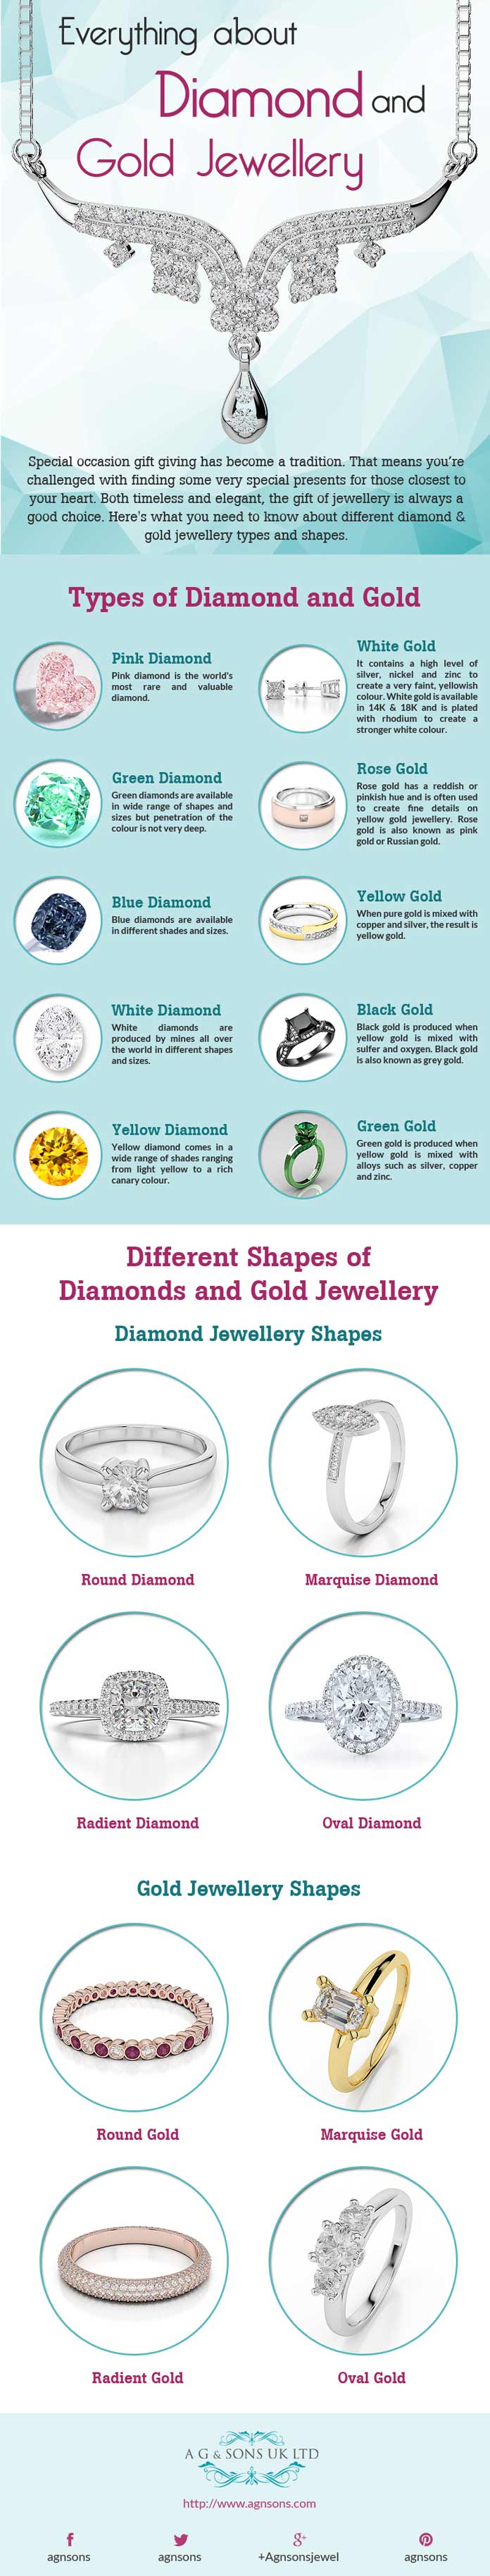 Everything About Diamond and Gold Jewellery